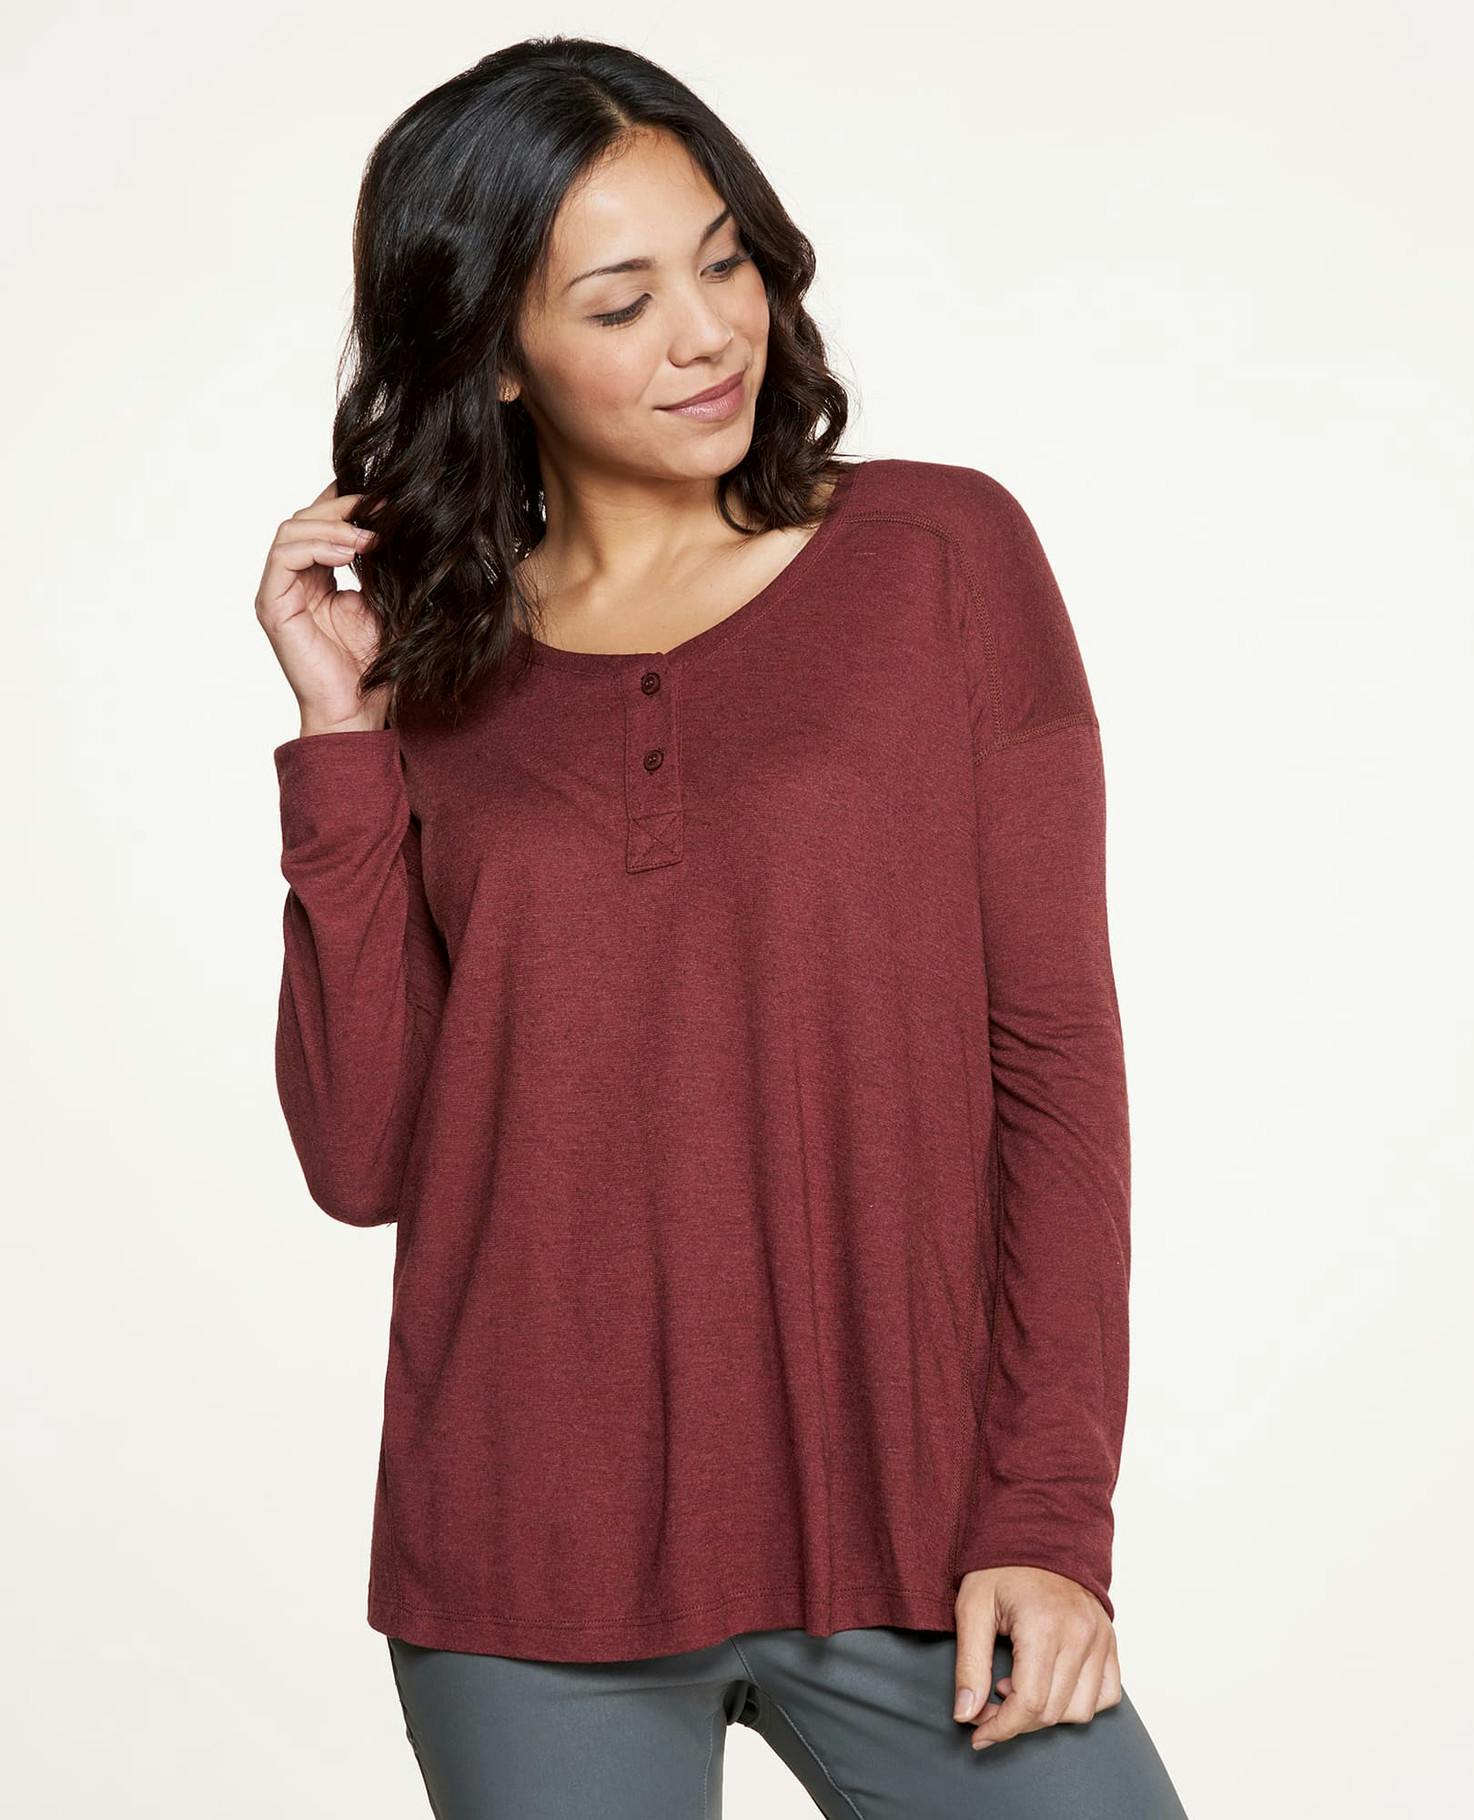 Toad&Co. Women's Aria Henley Long Sleeve Top